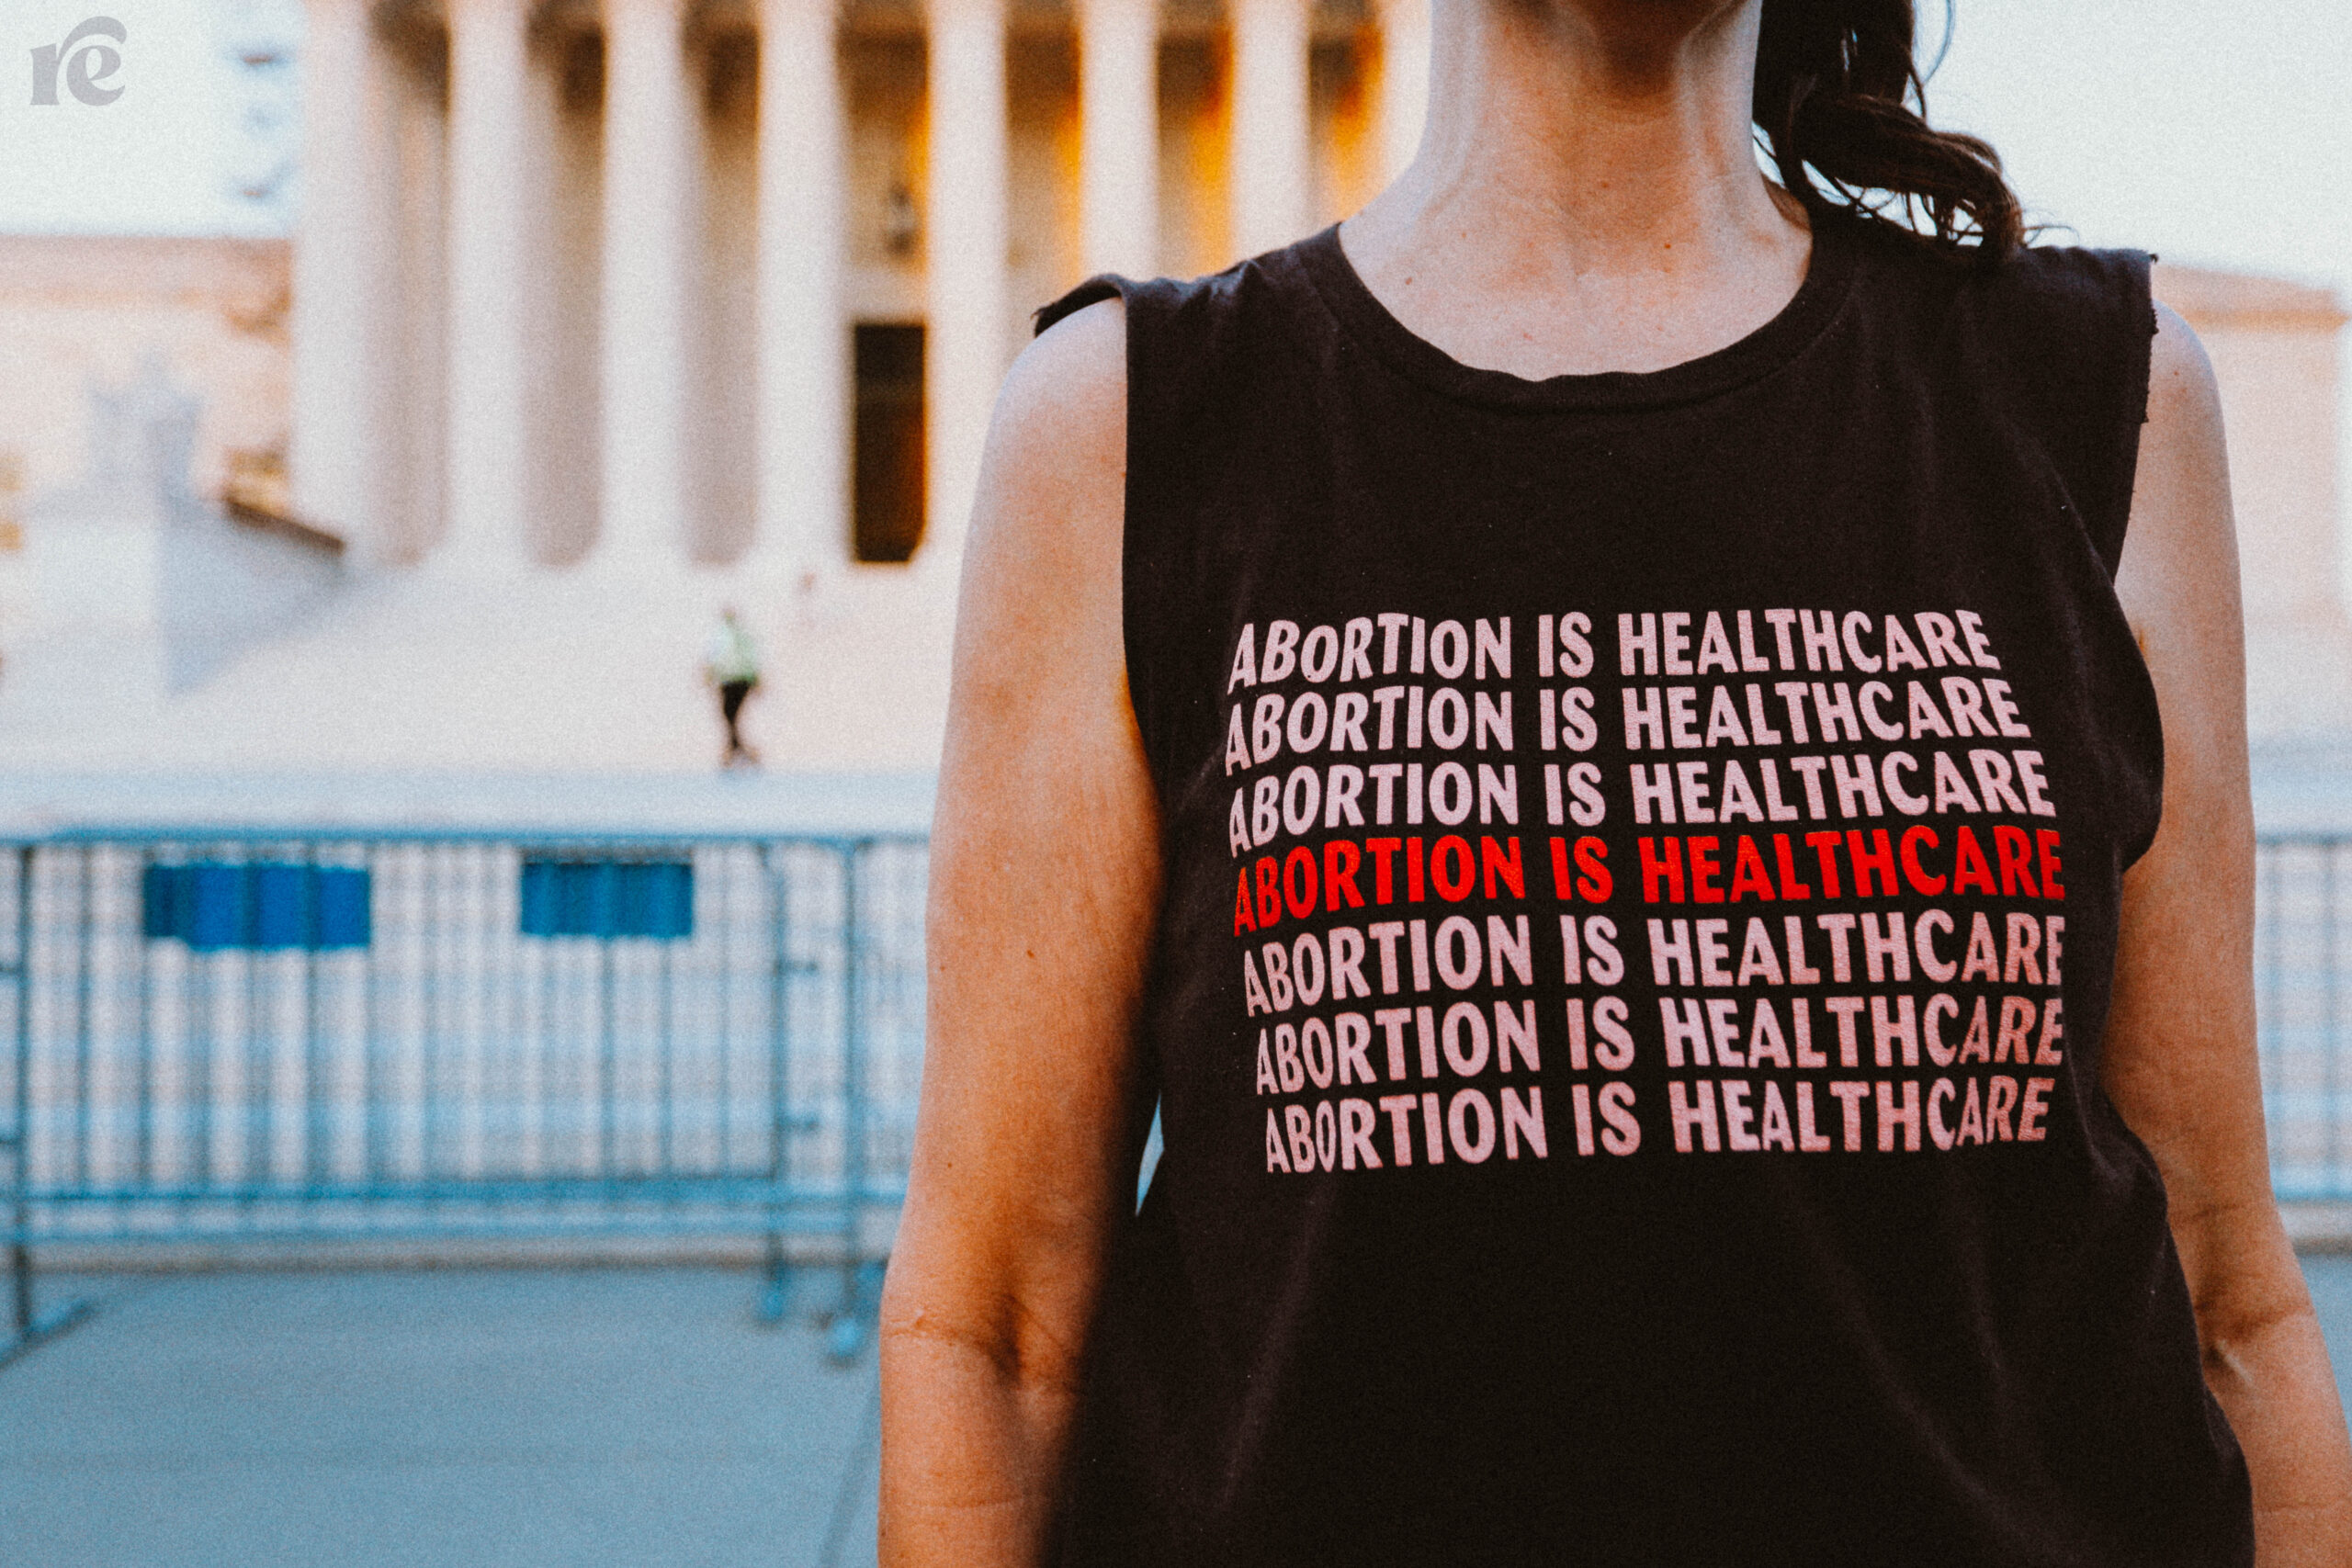 Photo of abortion rights supporter wearing a shirt that says Abortion is Healthcare